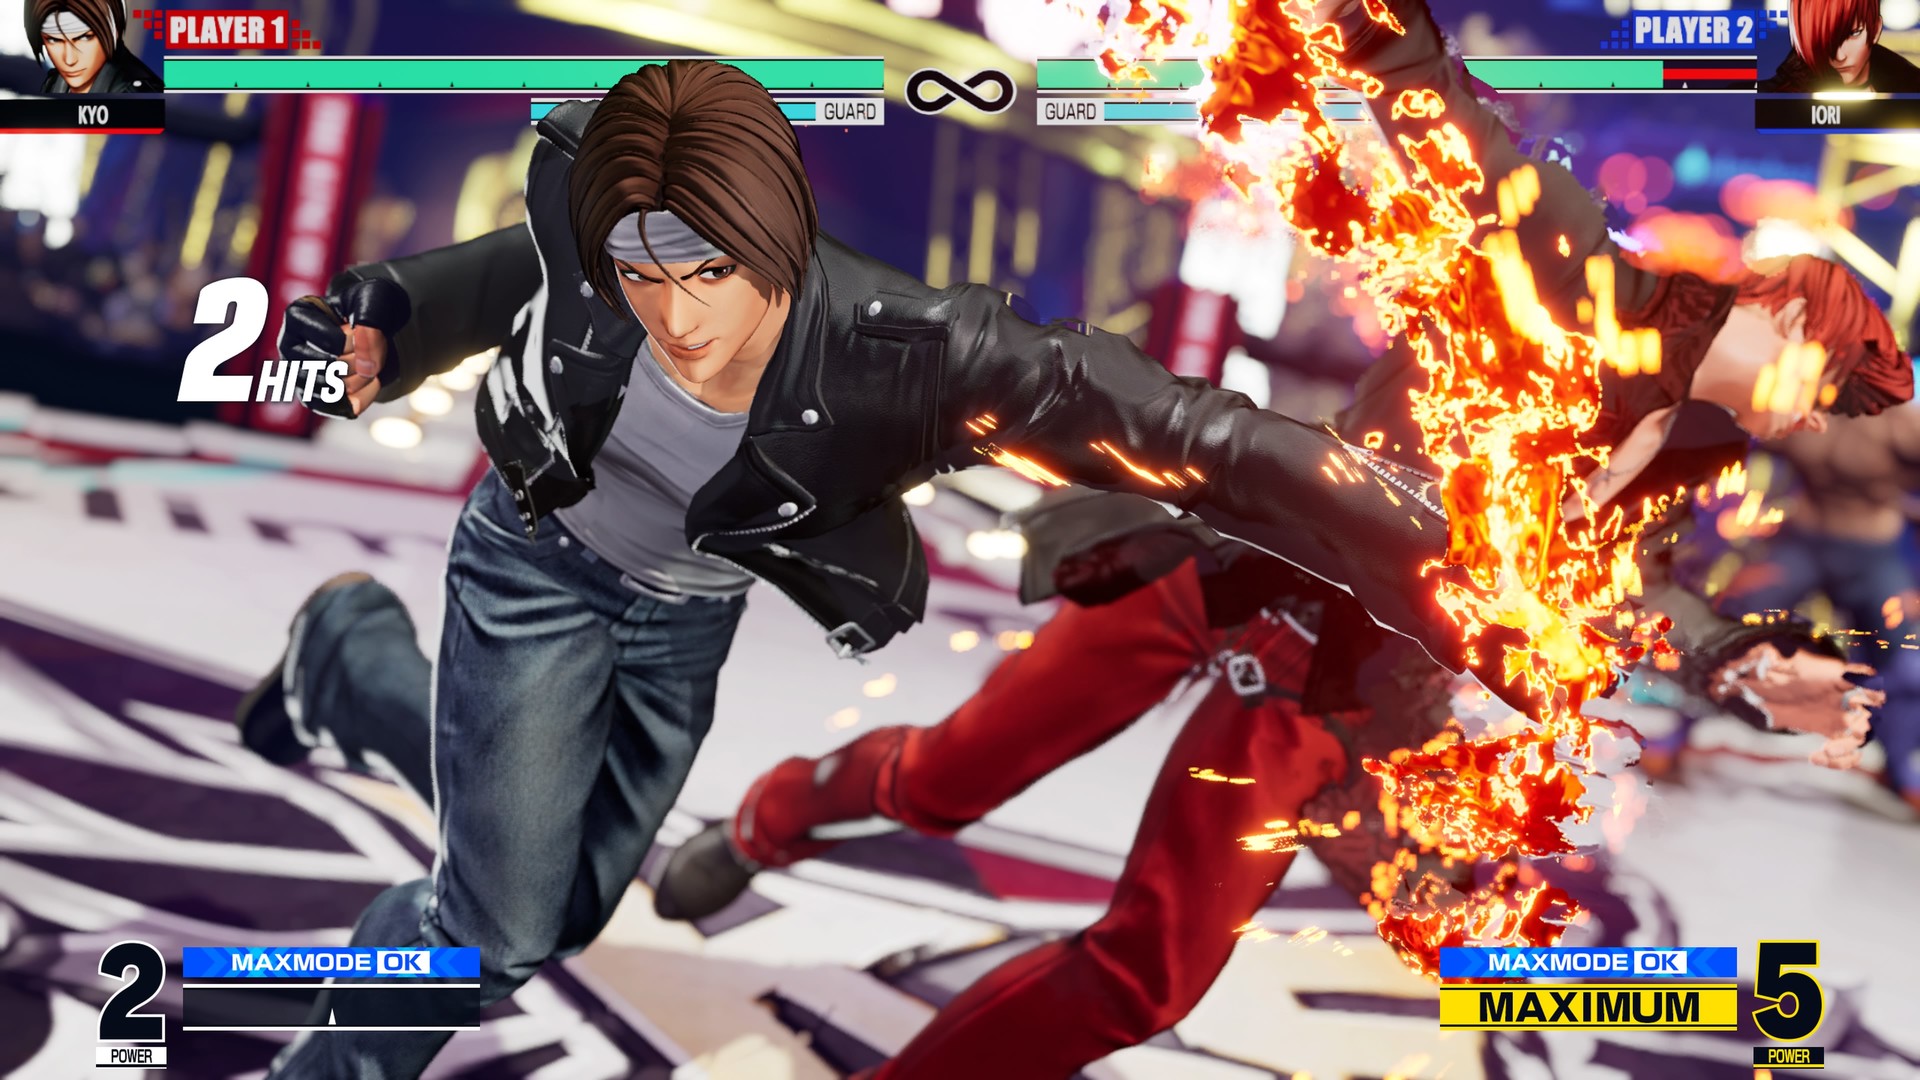 Download The King of Fighters XV para pc via torrent